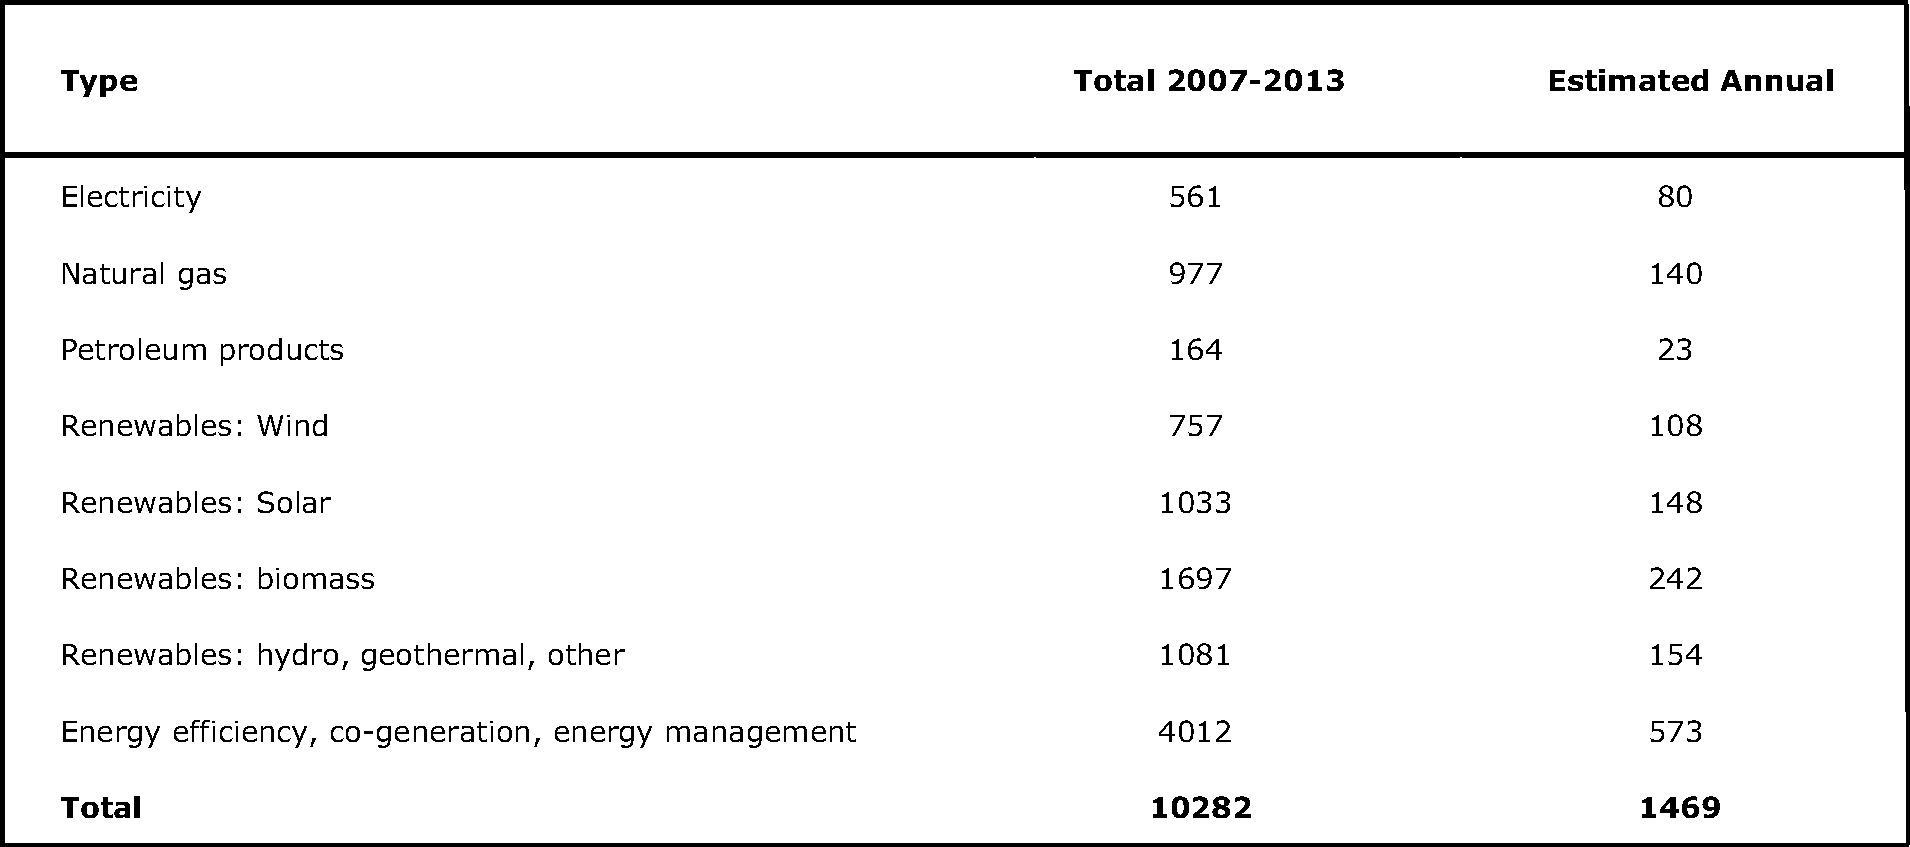 ‘Earmarked’ Structural Funding for energy project (€M - 2006 prices)